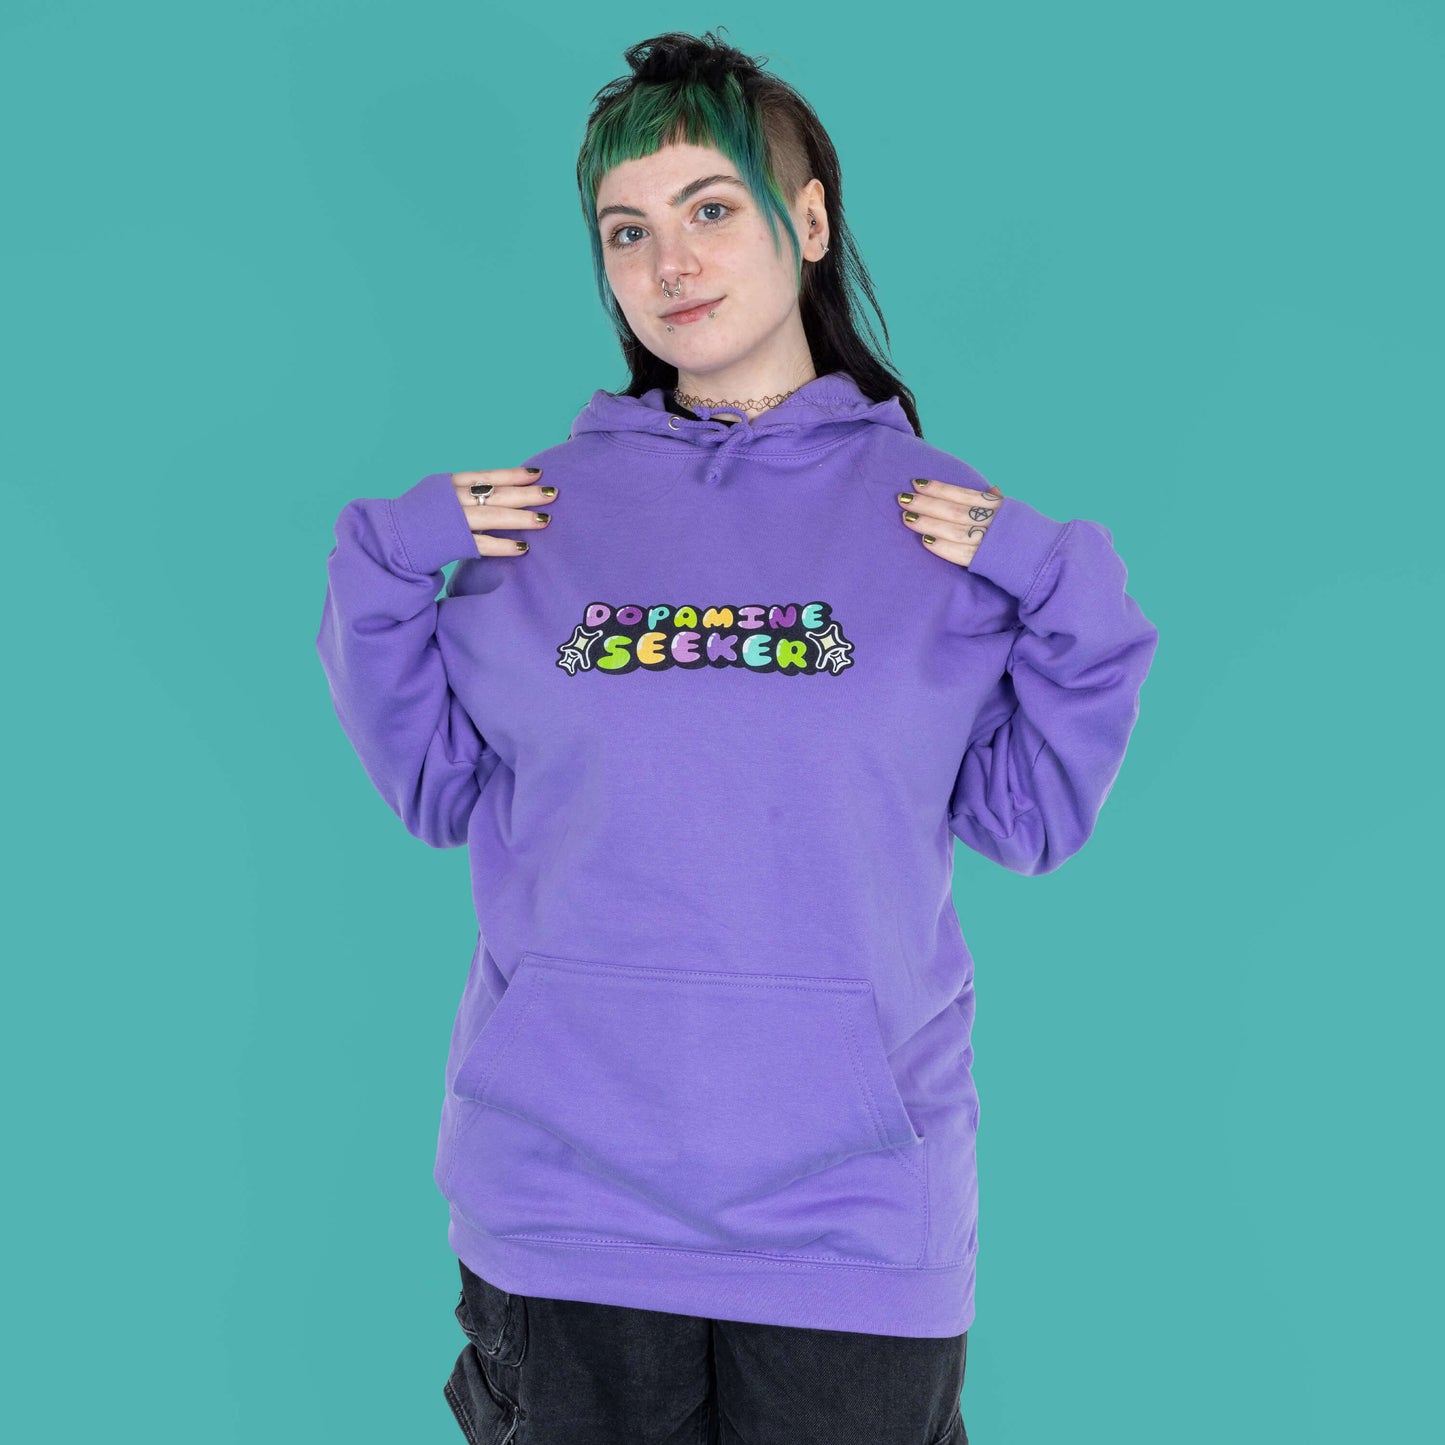 The Dopamine Seeker Hoodie in digital lavender being modelled by Faeryn who has a green and black mullet, they have styled the cosy hoodie with wide leg charcoal jeans. They are facing forward smiling with both hands resting on their shoulders. The hoodie design has 'dopamine seeker' written in the middle in rainbow bubble font and black sparkle outlines. The hoodie has purple drawstrings and a large centre pocket. Design is raising awareness for ADHD and neurodivergence.